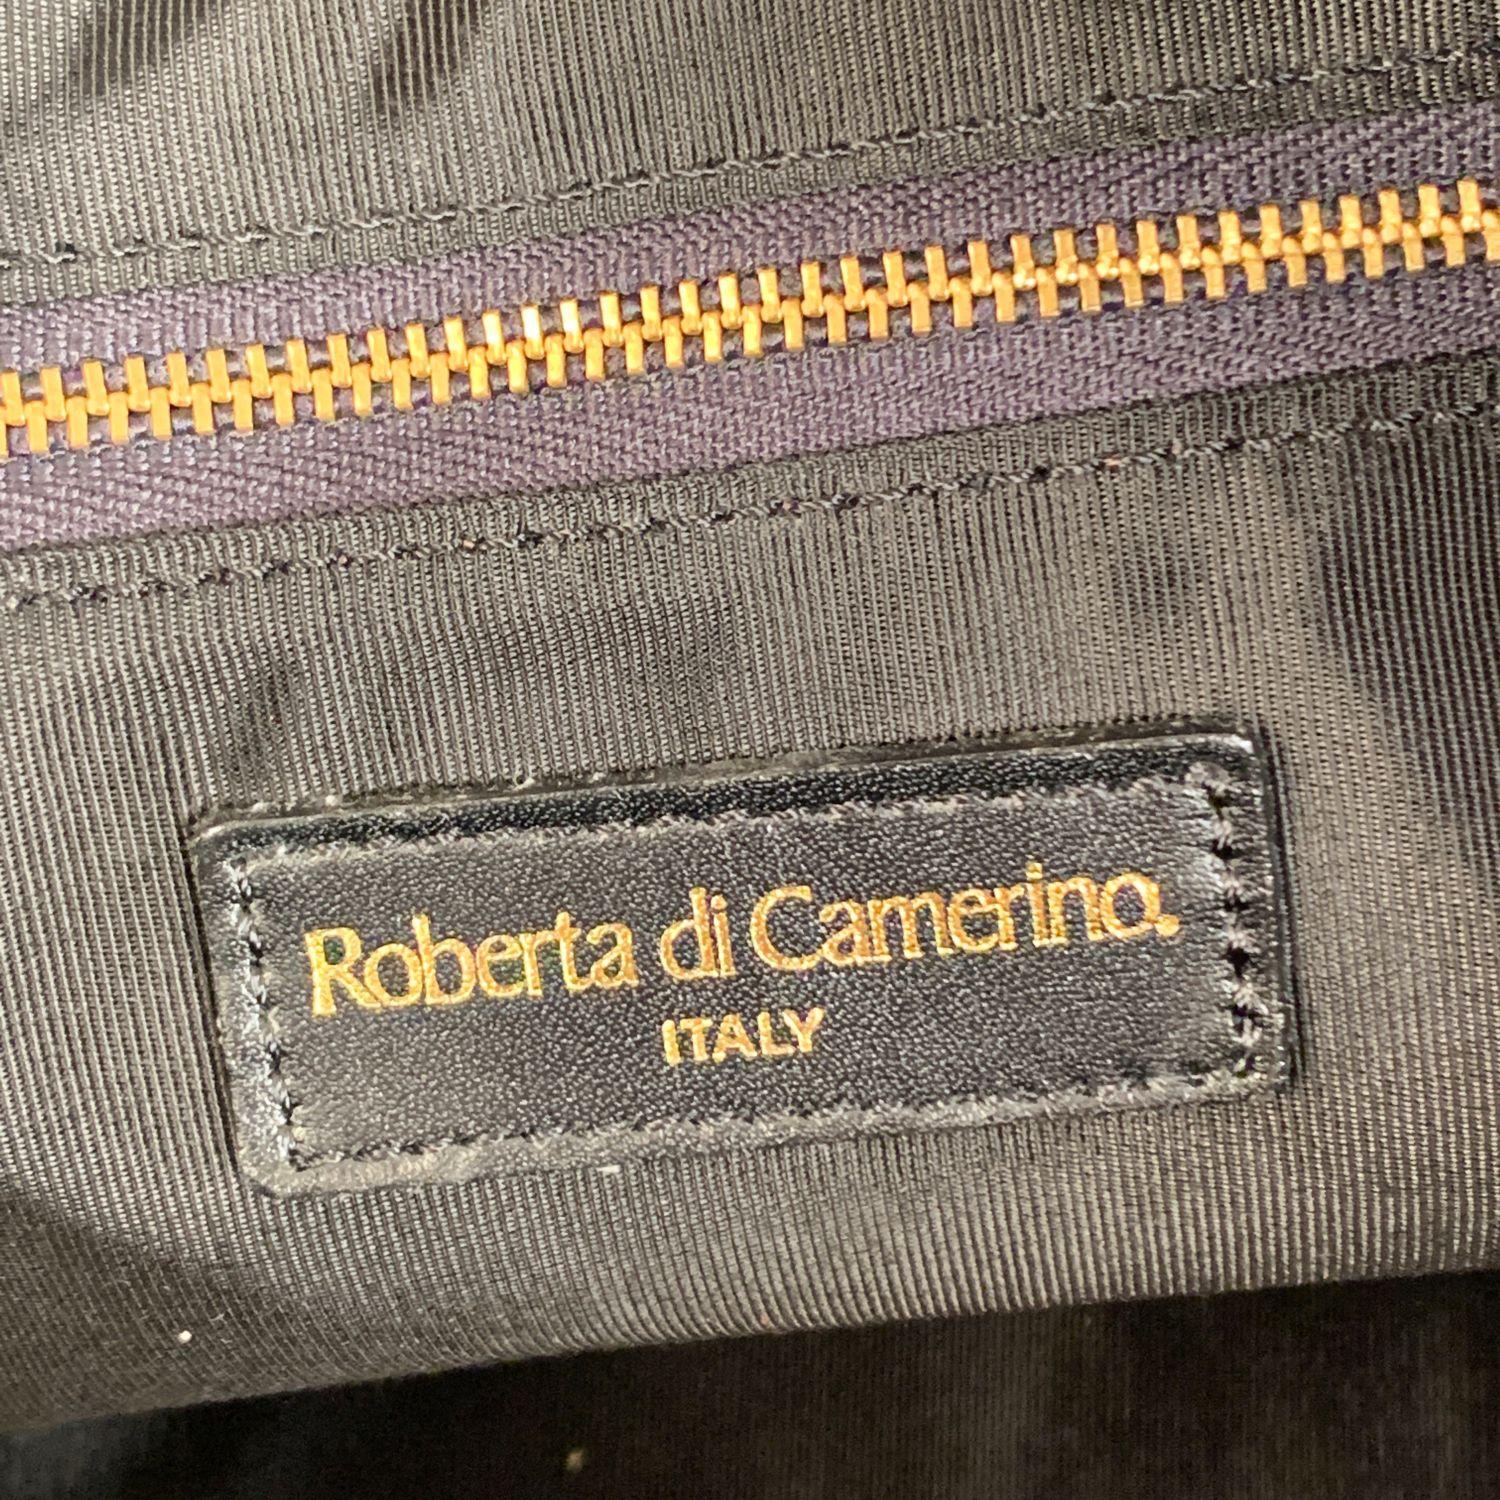 ROBERTA DI CAMERINO large satchel in black color with diamond logo pattern. Double top handles and removable and adjustable shoulder strap. The bag is very roomy so it is ideal as a travel bag. 1 main compartment with upper zipper closure. 2 side